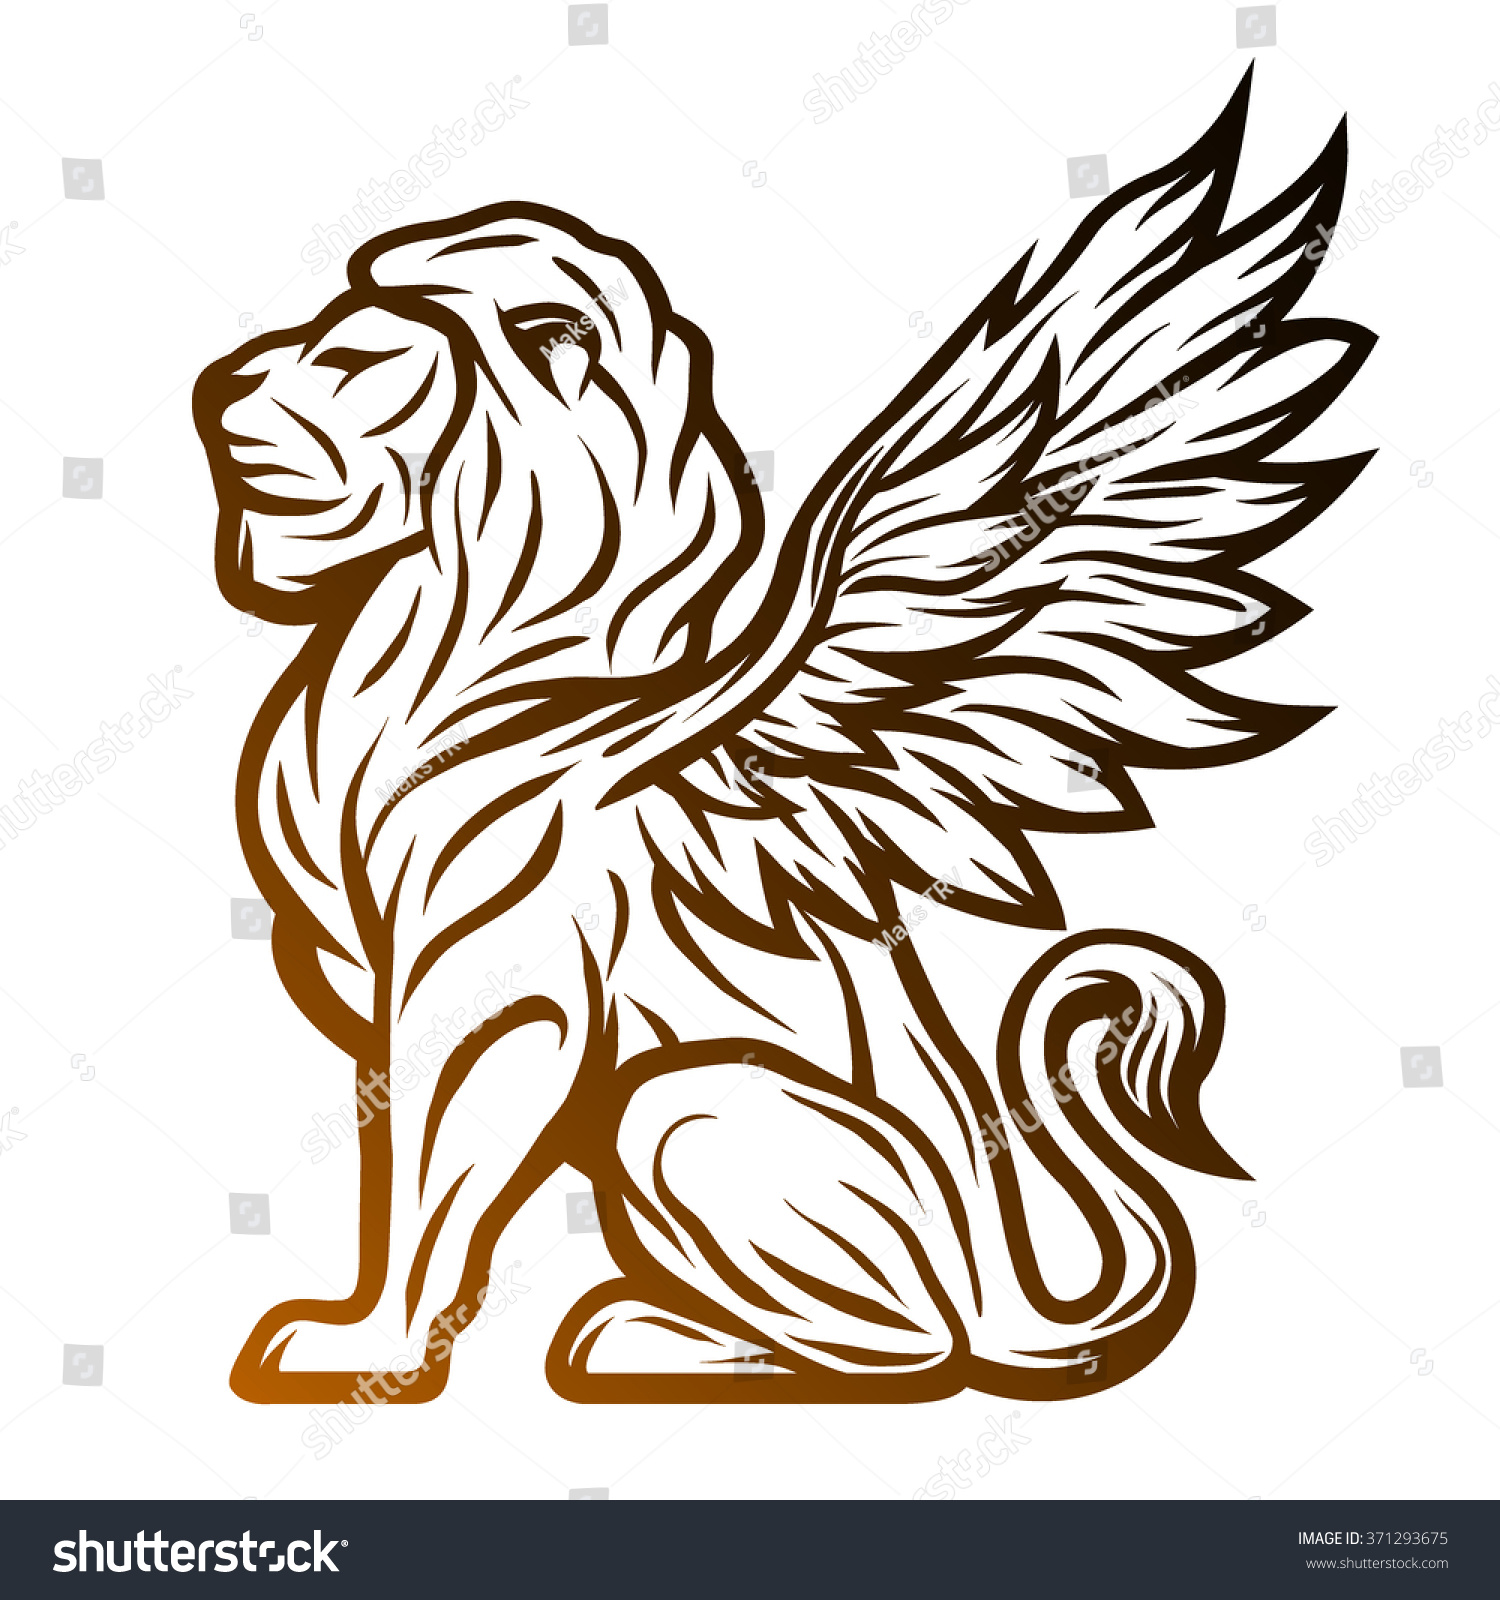 Mythological Lion Statue With Wings. Stock Vector Illustration ...